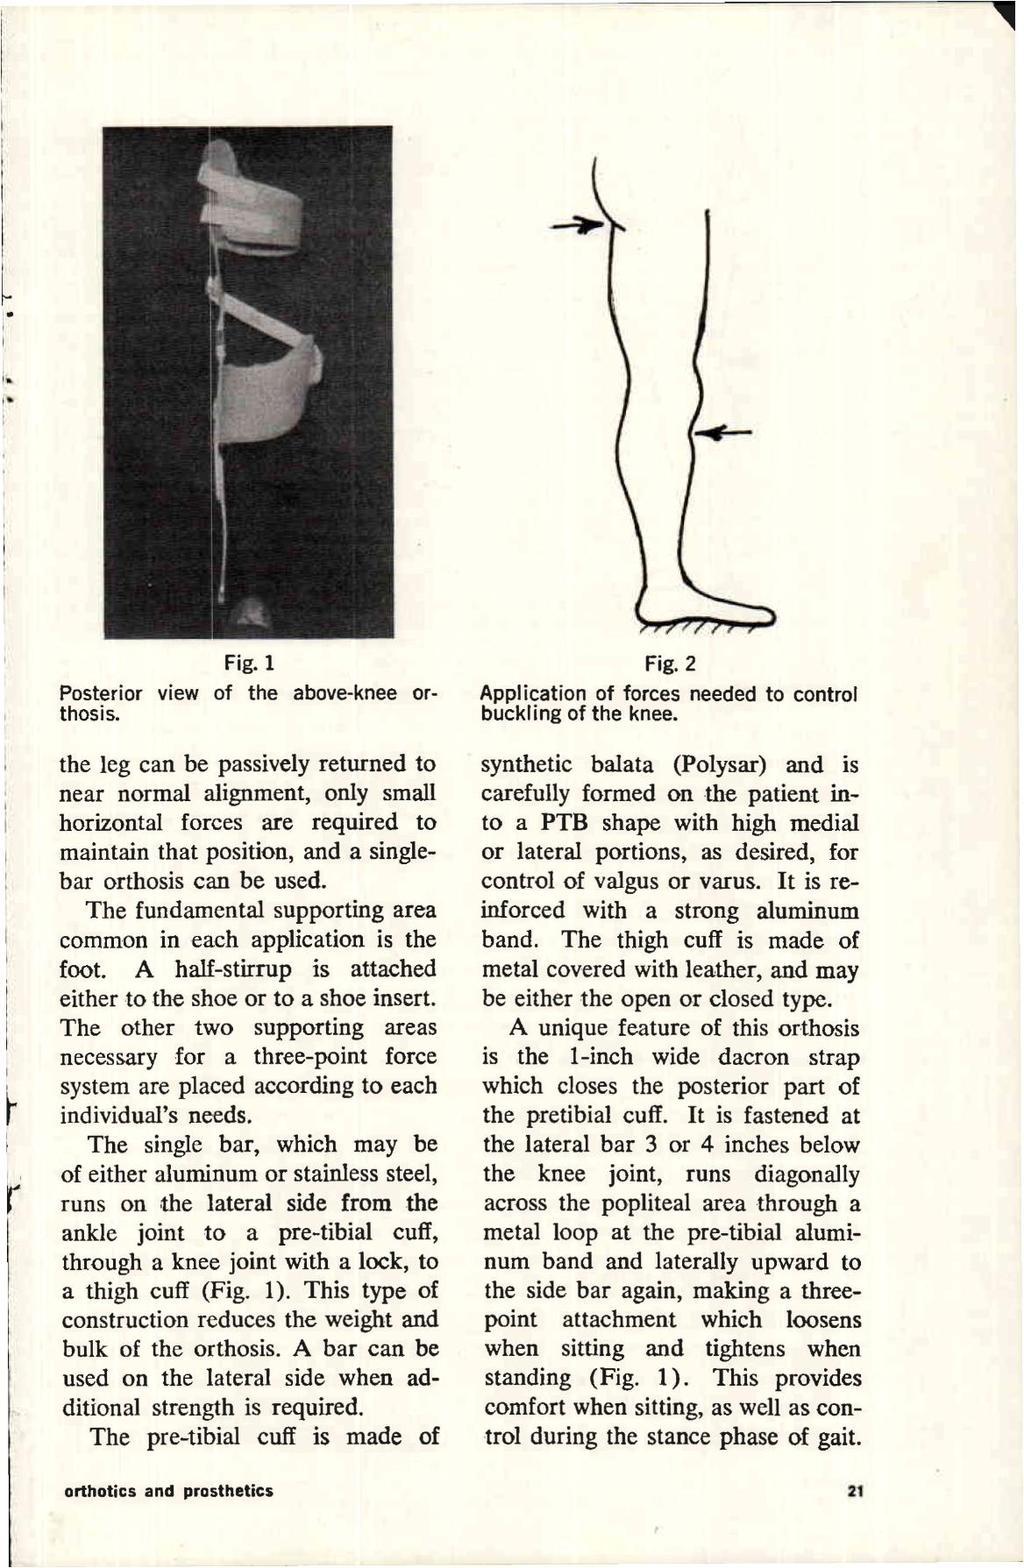 Fig. 1 Posterior view of the above-knee orthosis.